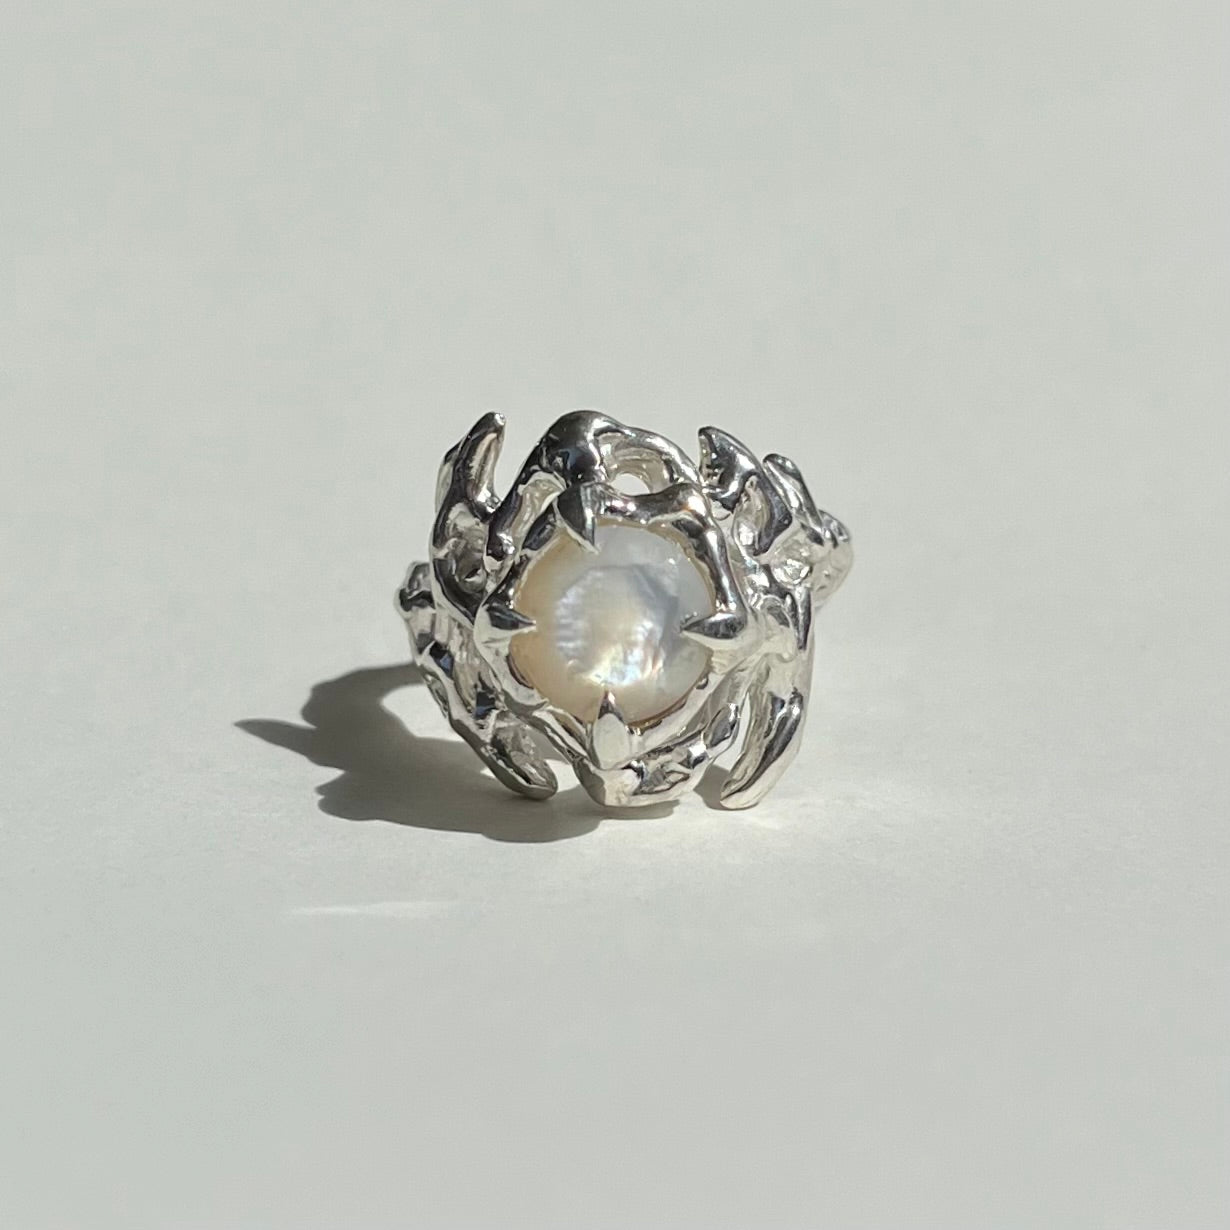 KHAOS sterling silver and Mother of pearl ring